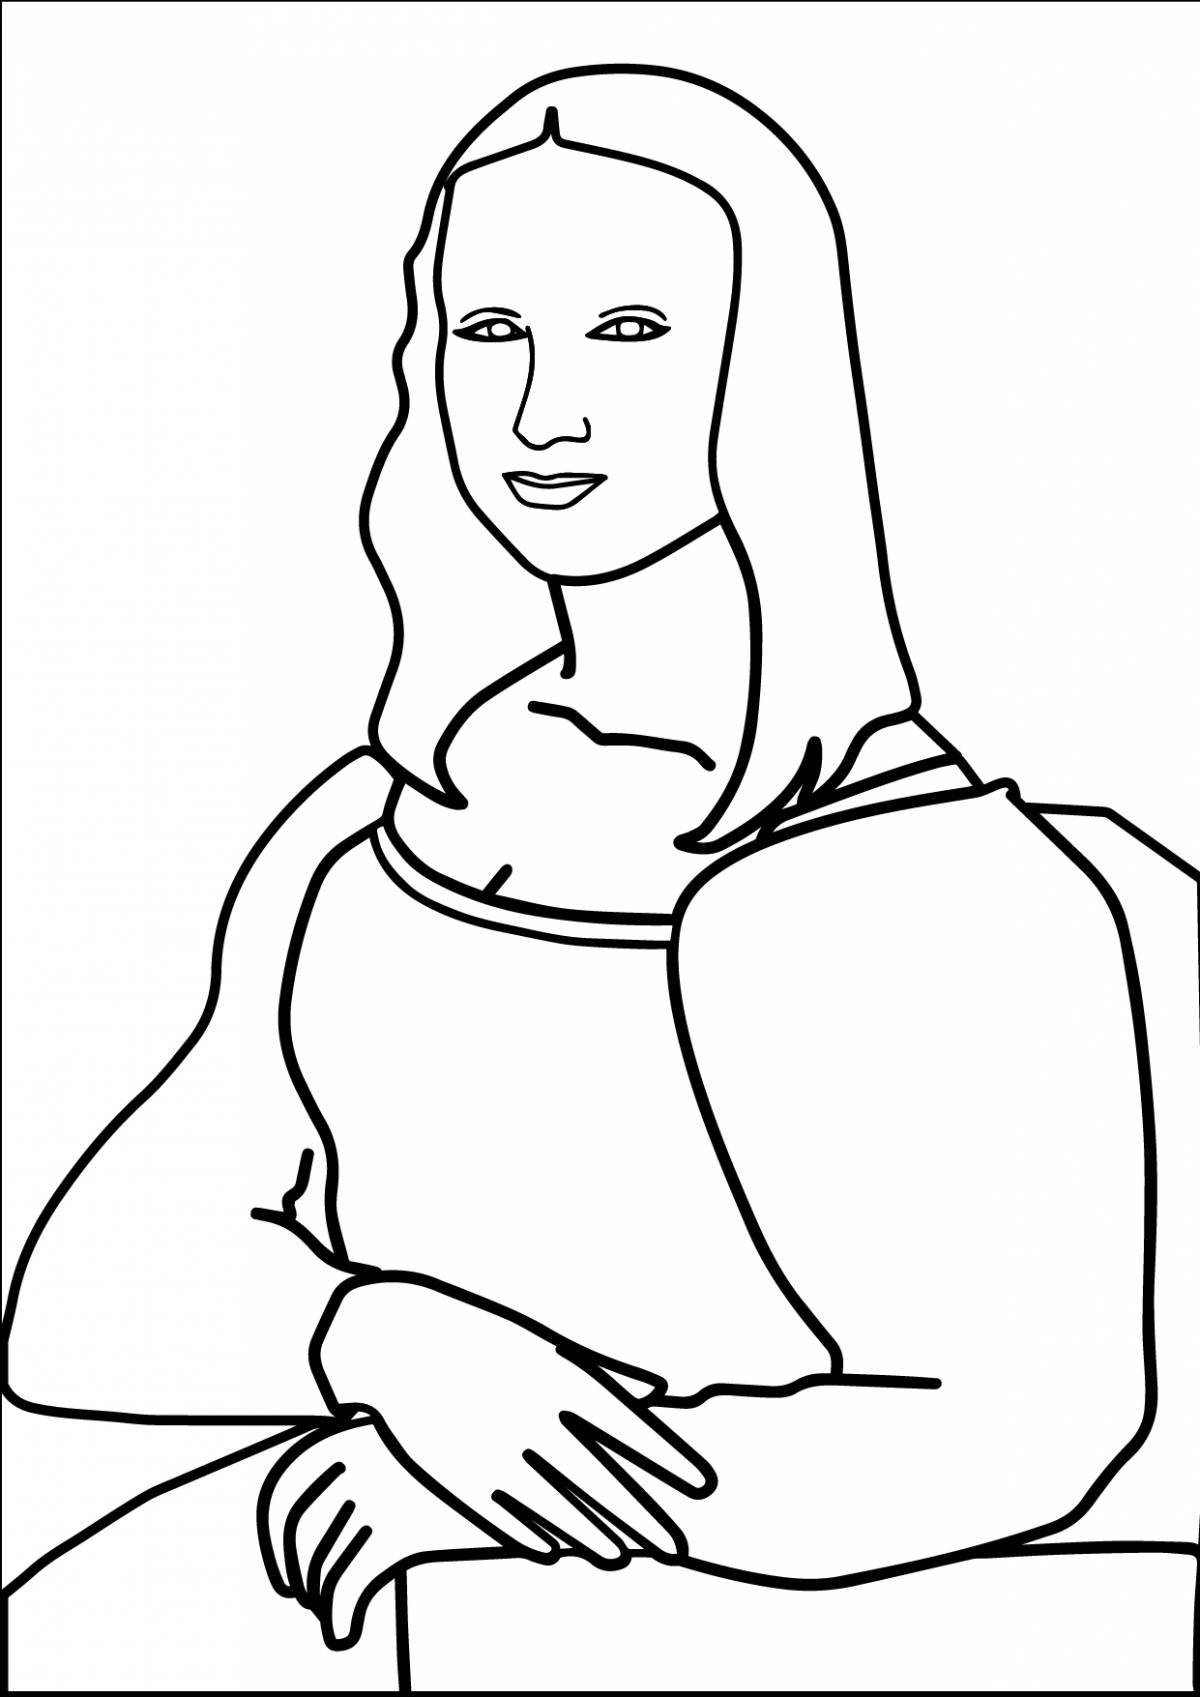 Mona glowing coloring book